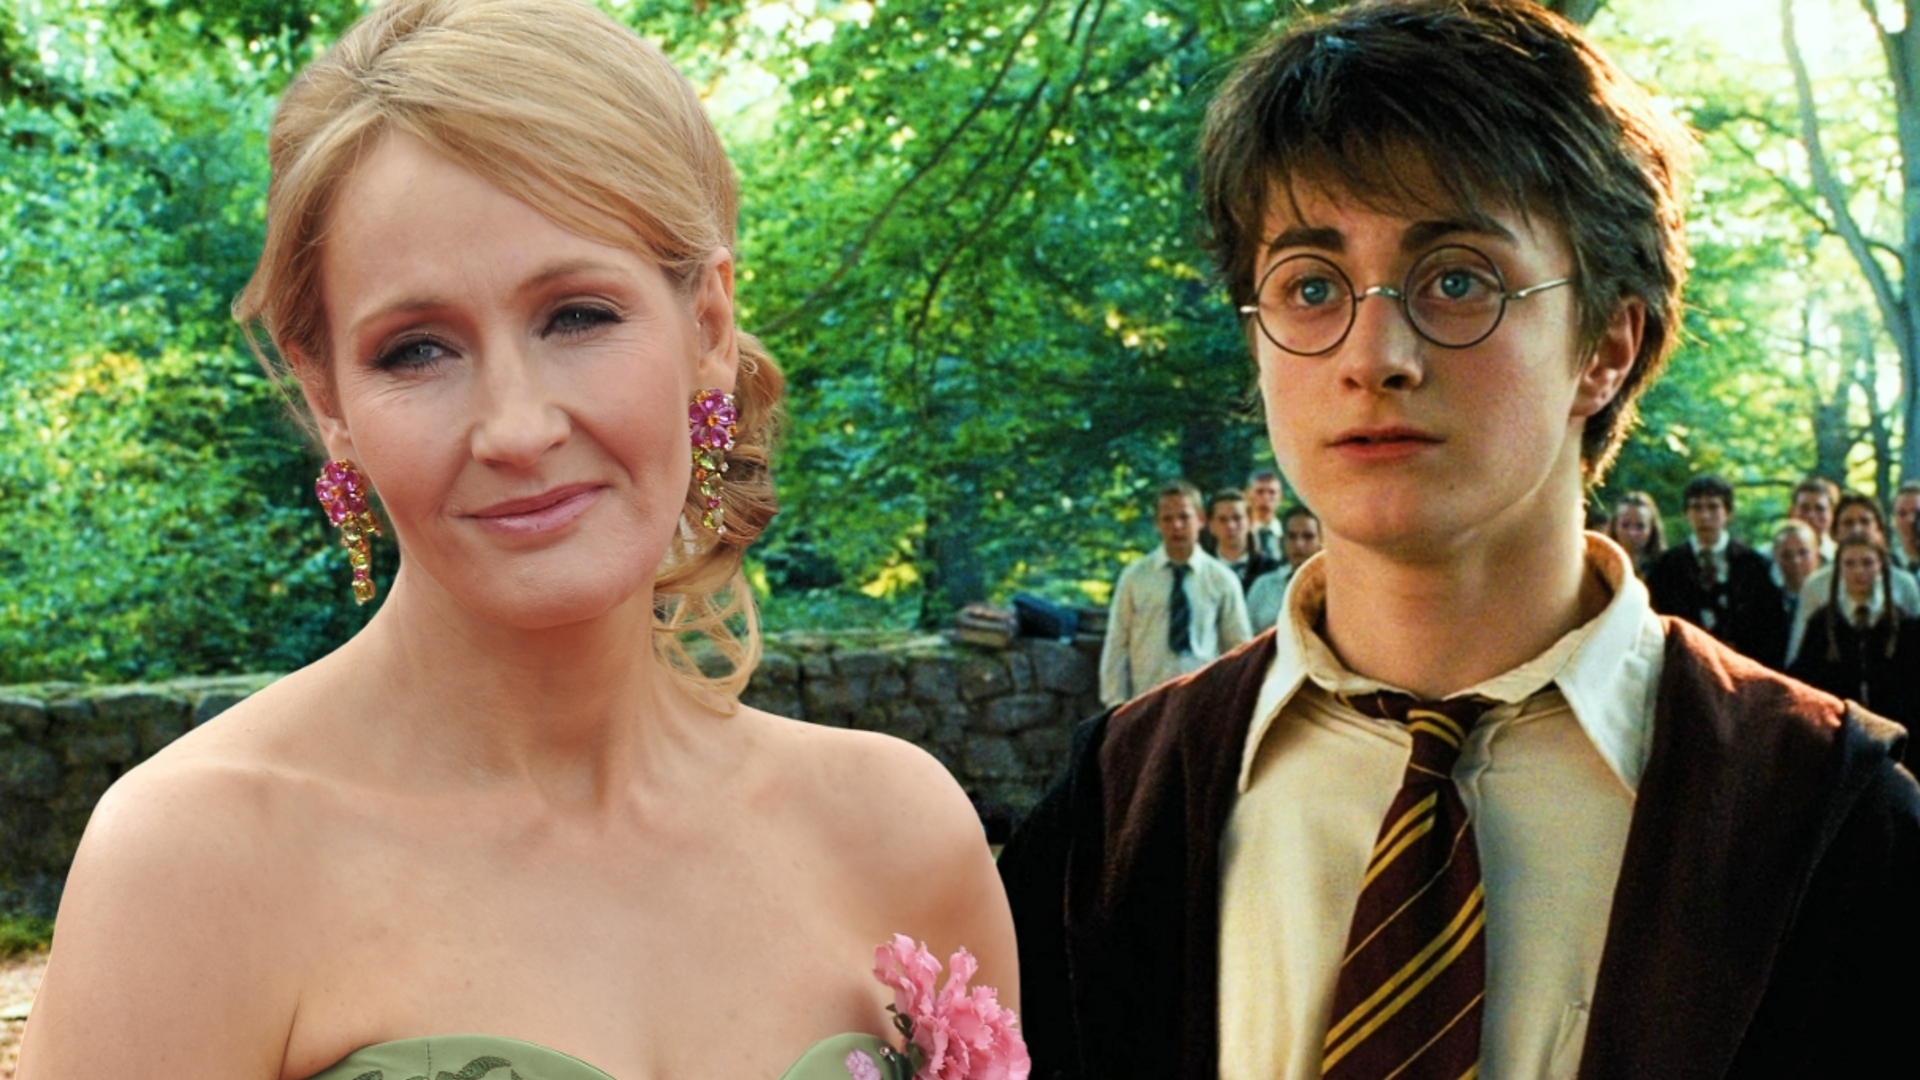 Harry Potter Forum Booted J.K. Rowling… For 'Inadequate' Knowledge of the Books